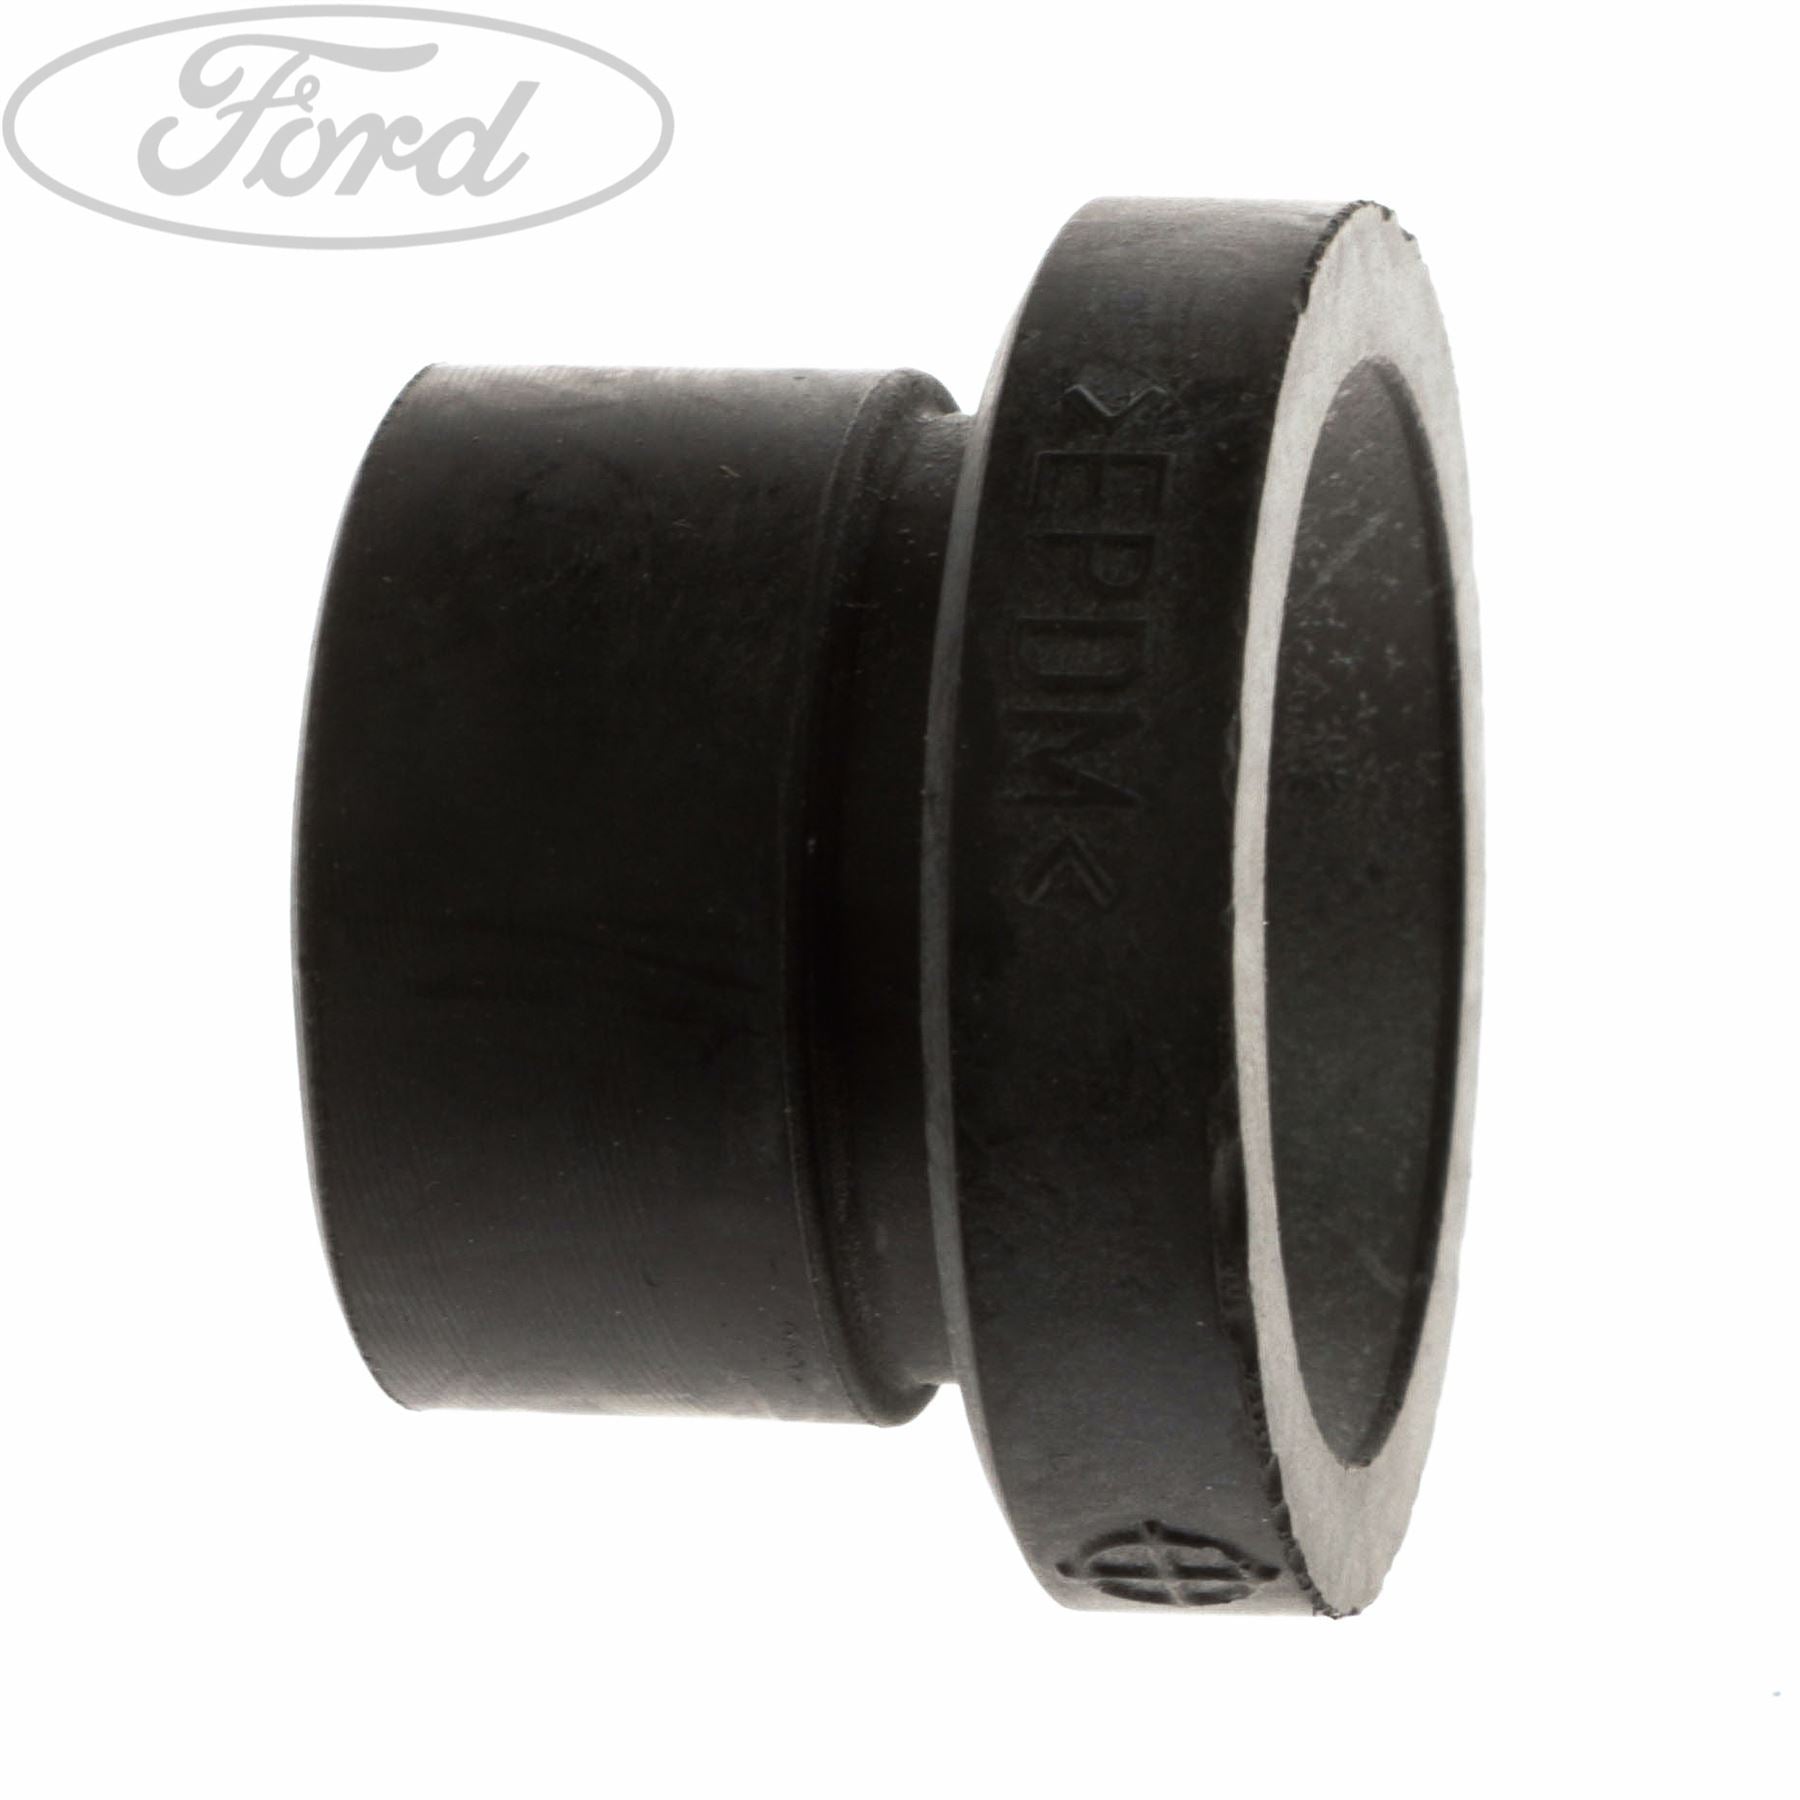 Ford CYLINDER HEAD COVER GROMMET - 1755733